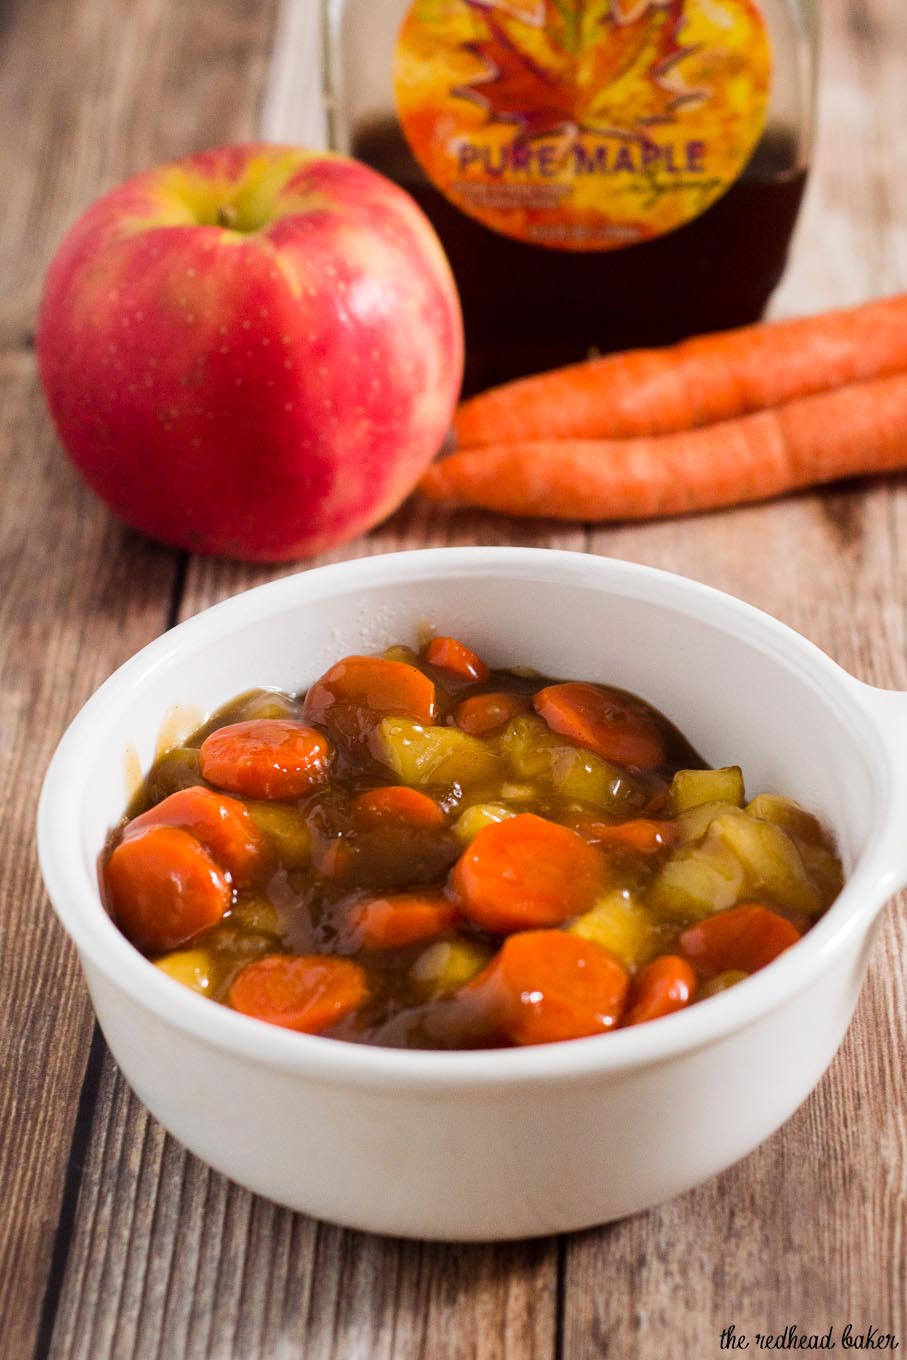 Maple carrots and apples are a delicious and easy side dish to accompany any fall meal, from weeknight dinner to holiday feast.